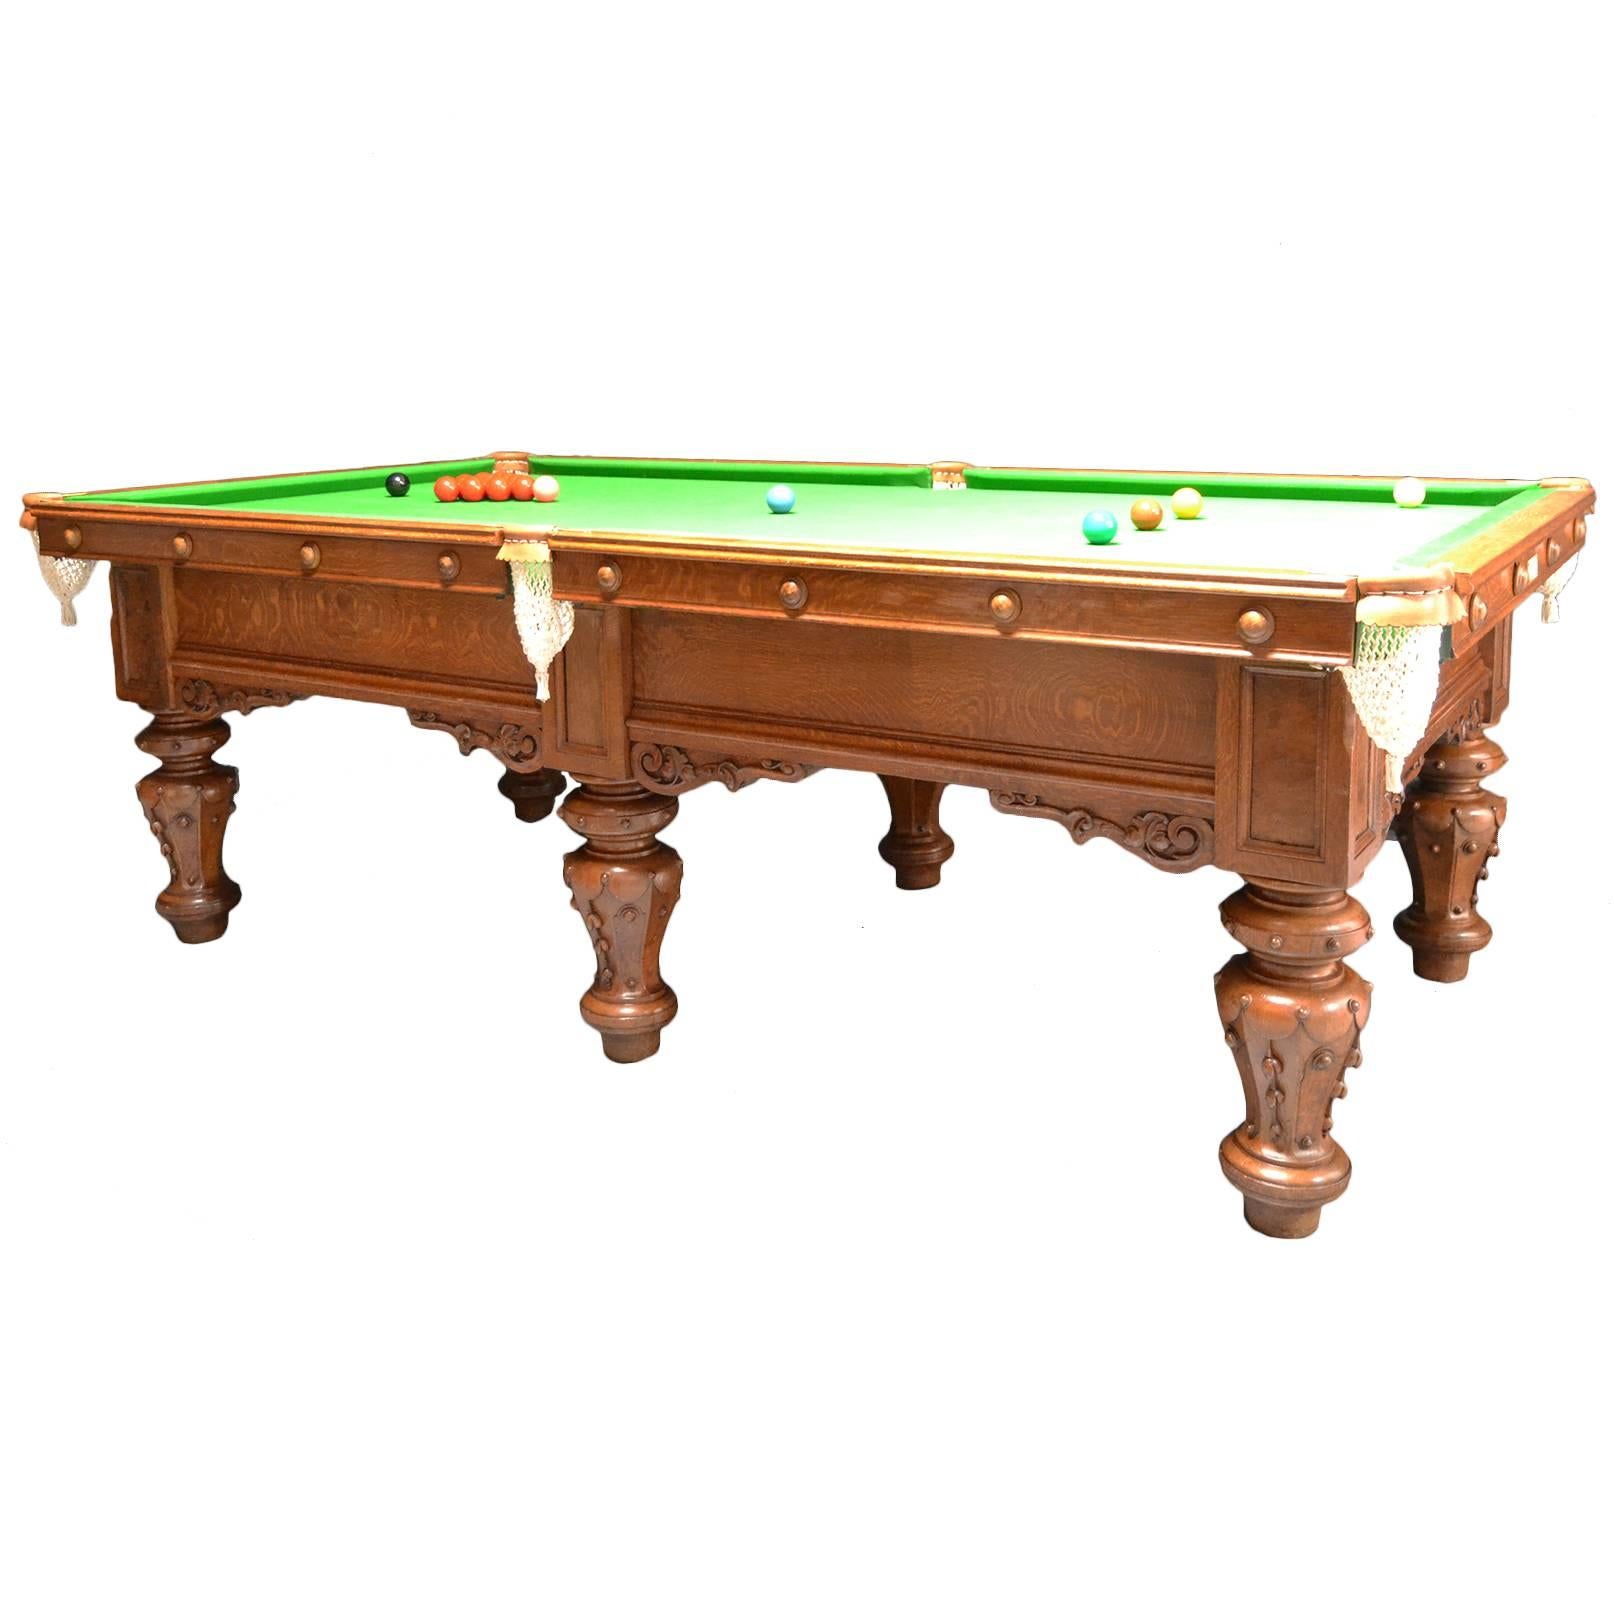  Billiard -Snooker, Pool Table Exceptional 8ft  Solid Oak  circa 1860 